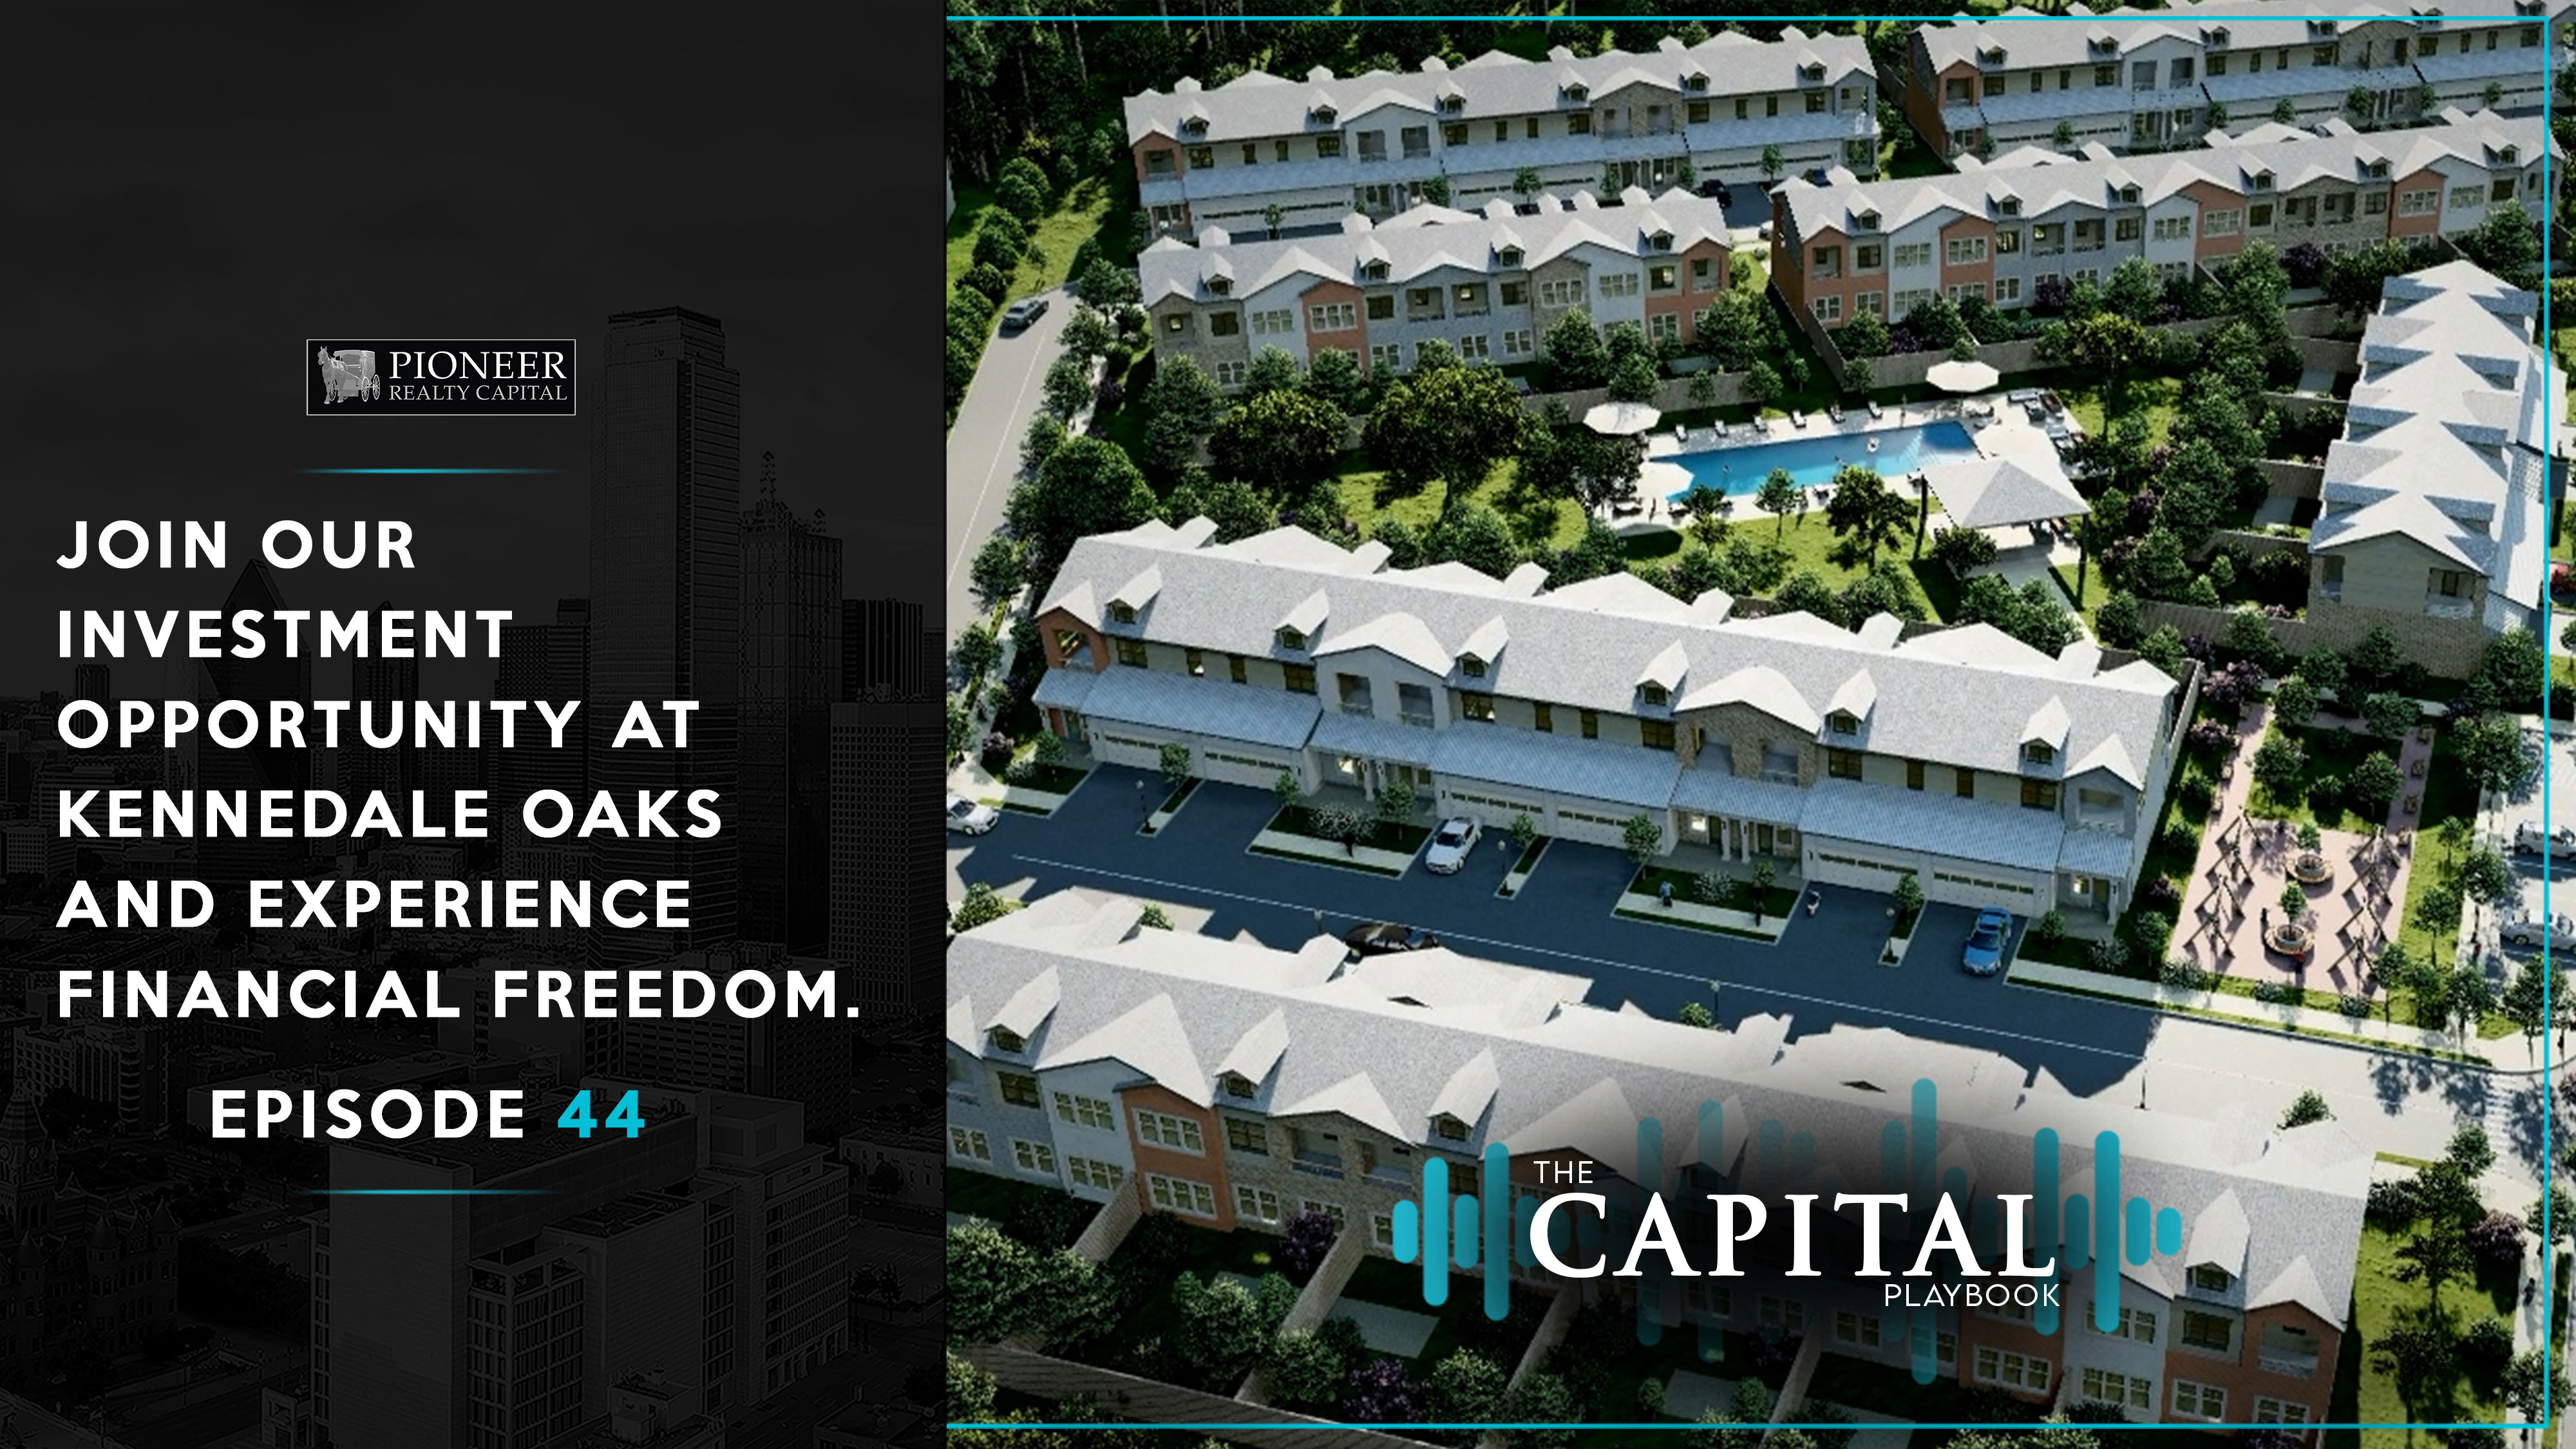 Discover Your Path to Financial Freedom with Kennedale Oaks Investment Opportunity; Capital Playbook Podcast Show Episode 44 Premieres Today